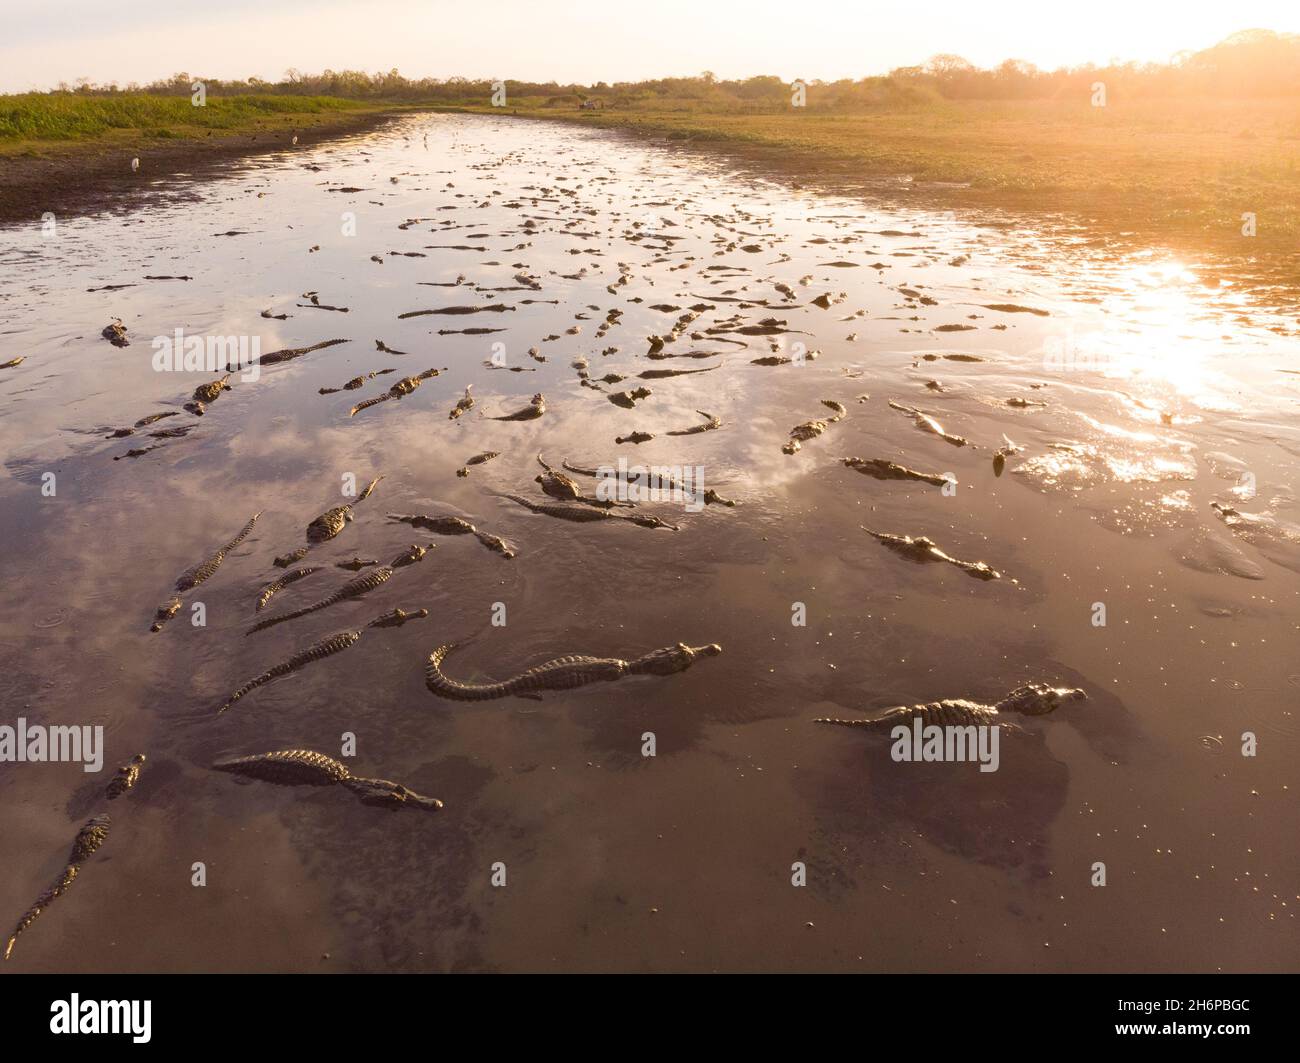 Lots of caimans gathering at a drying lake during an extreme dry season in the Pantanal of Brazil Stock Photo